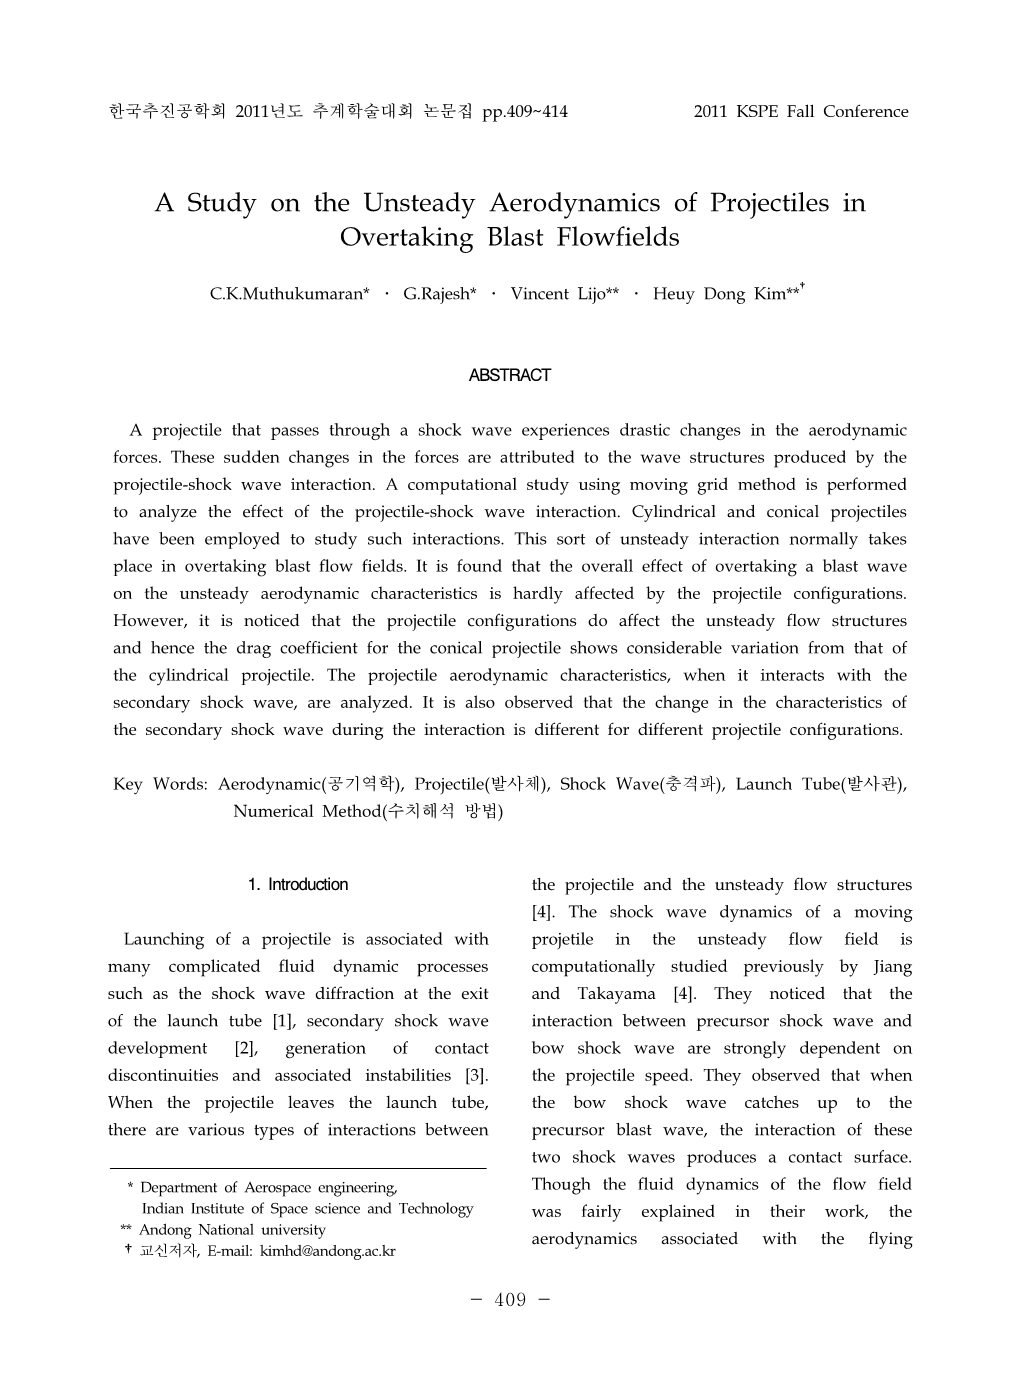 A Study on the Unsteady Aerodynamics of Projectiles in Overtaking Blast Flowfields